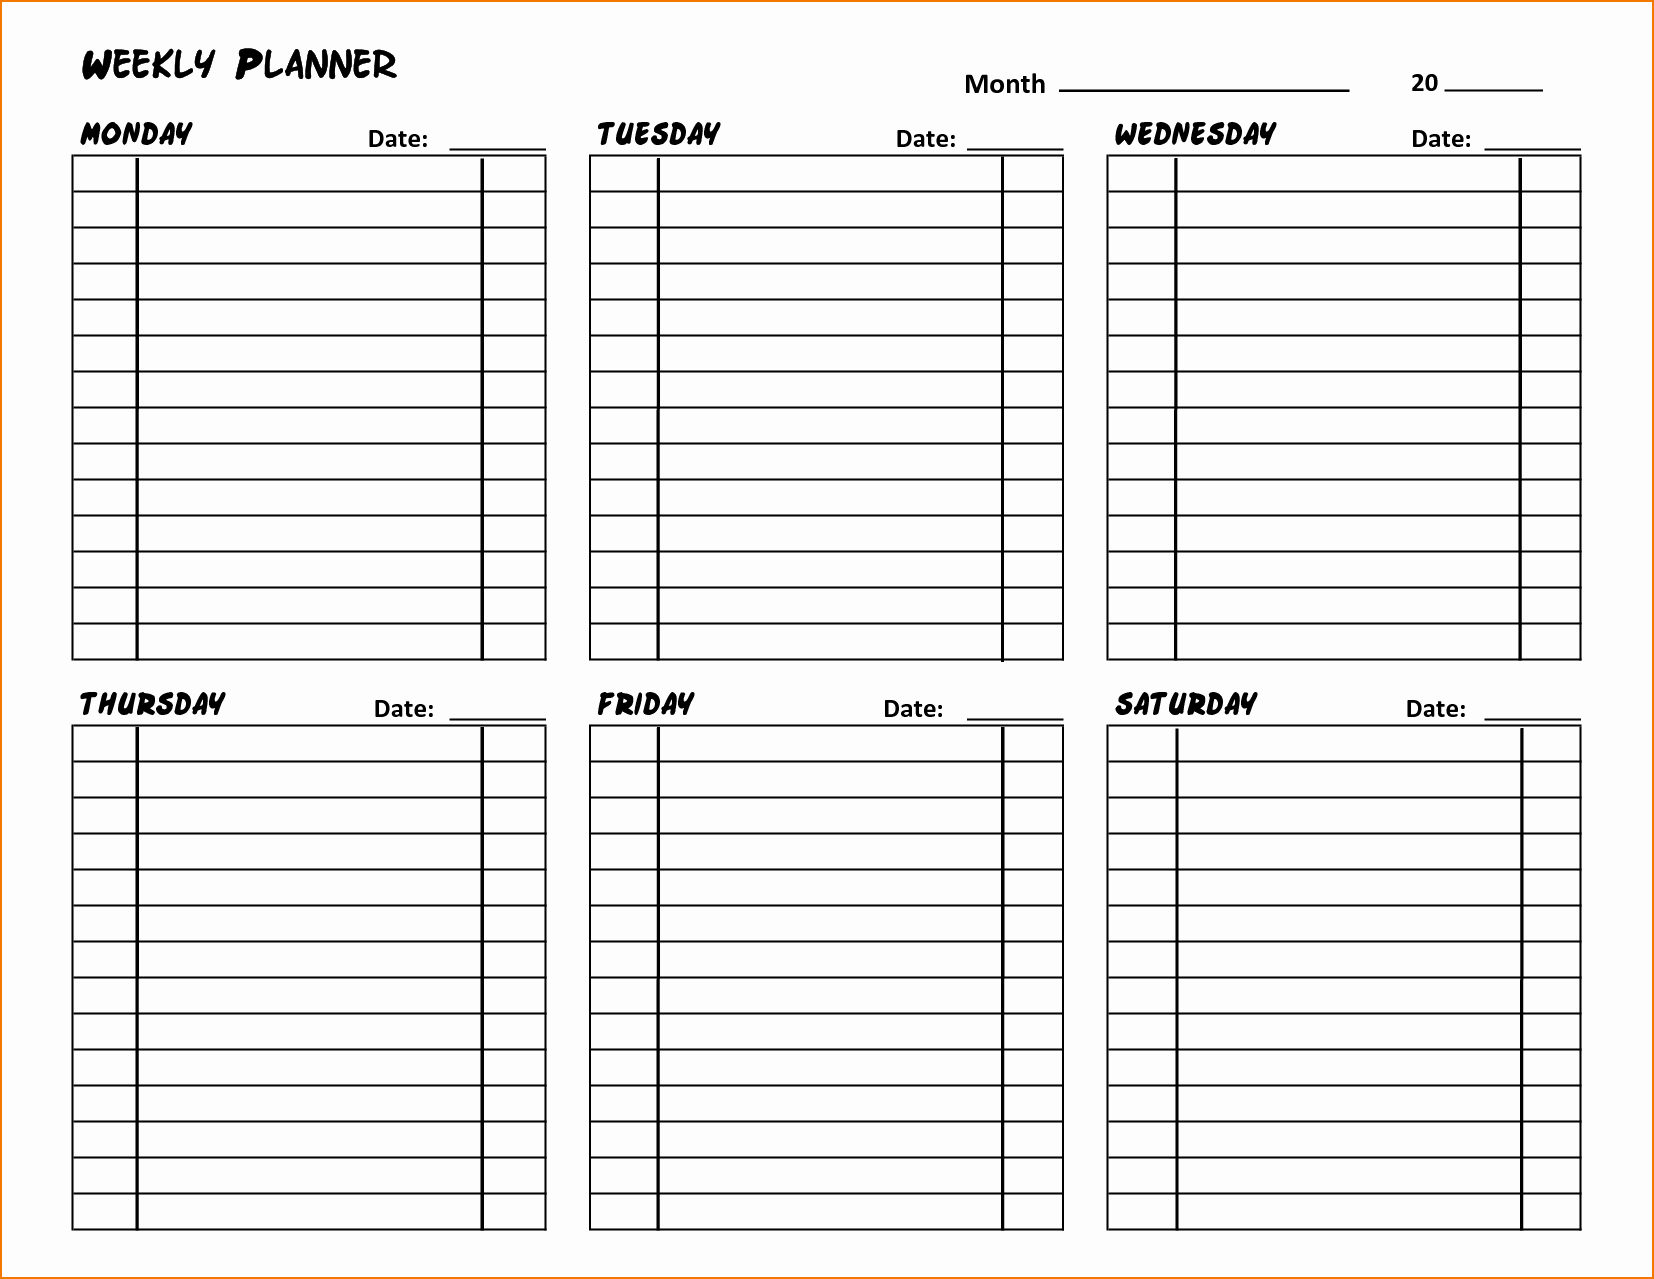 Daily Planner Template Word Lovely 5 Daily Planner Template Word